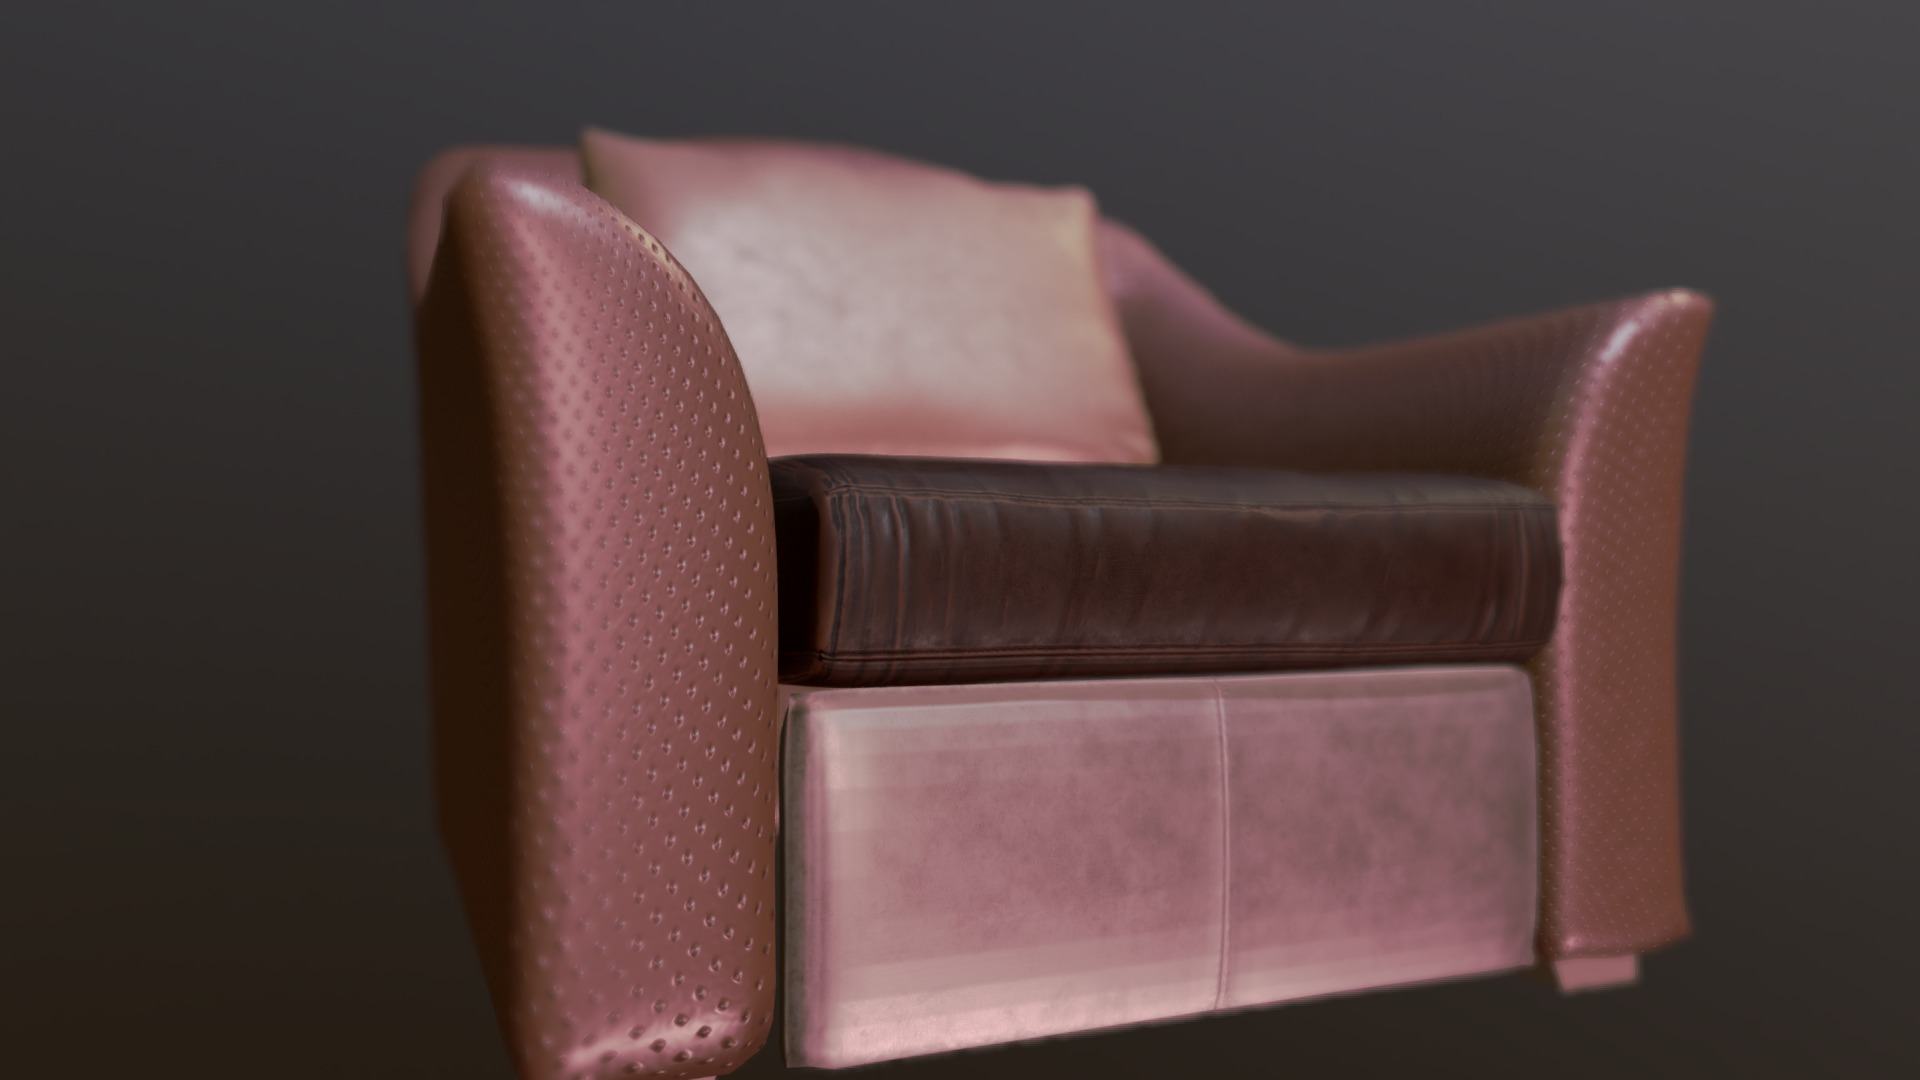 3D model Arm Sofa - This is a 3D model of the Arm Sofa. The 3D model is about a pink couch with a white pillow.